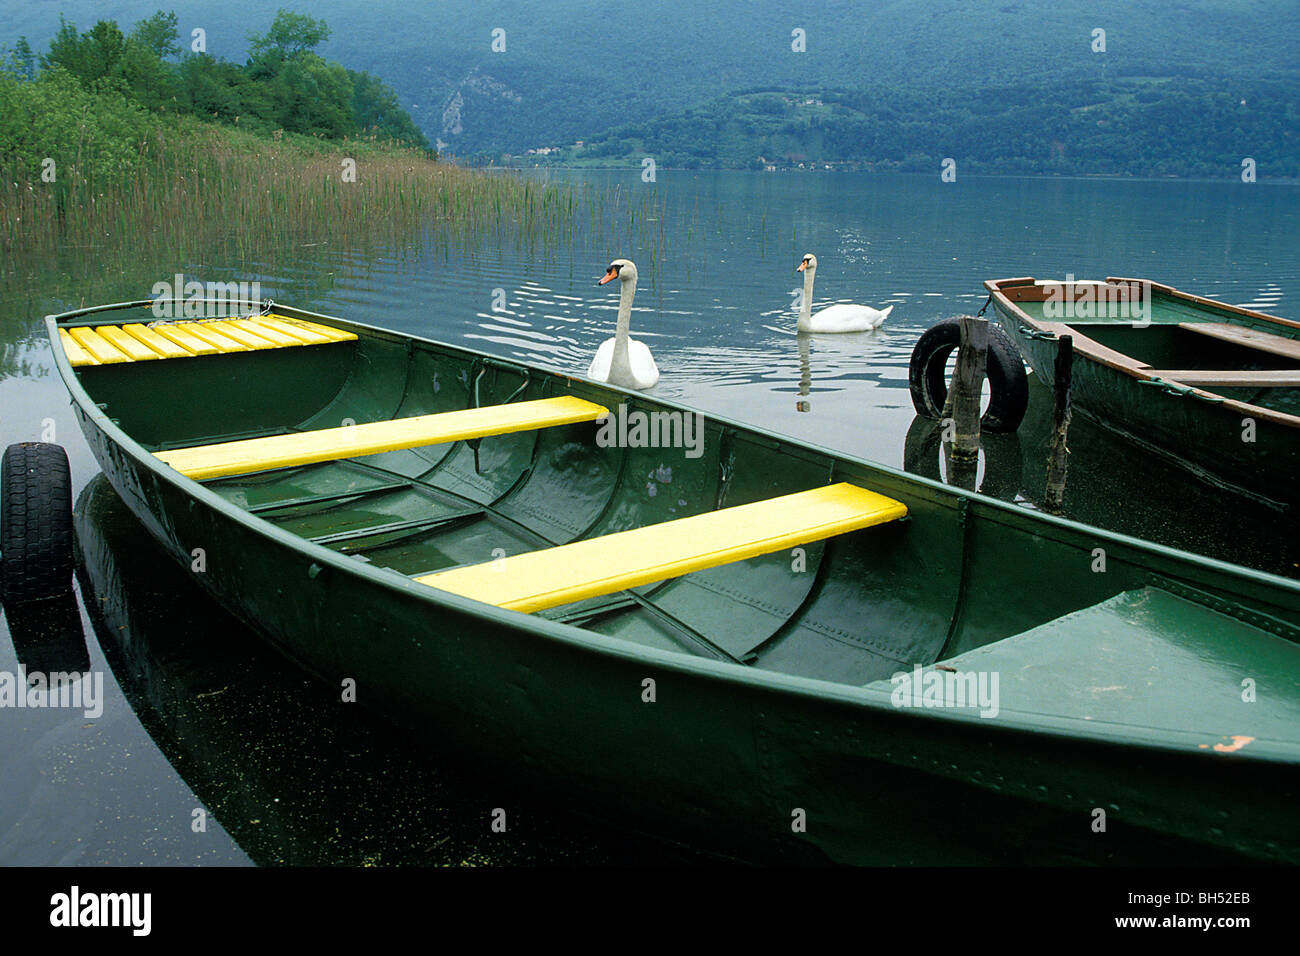 SMALL BOATS, PORT OF SAINT-ALBAN DE MONTBEL, AIGUEBELETTE LAKE, SAVOY (73), FRANCE Stock Photo